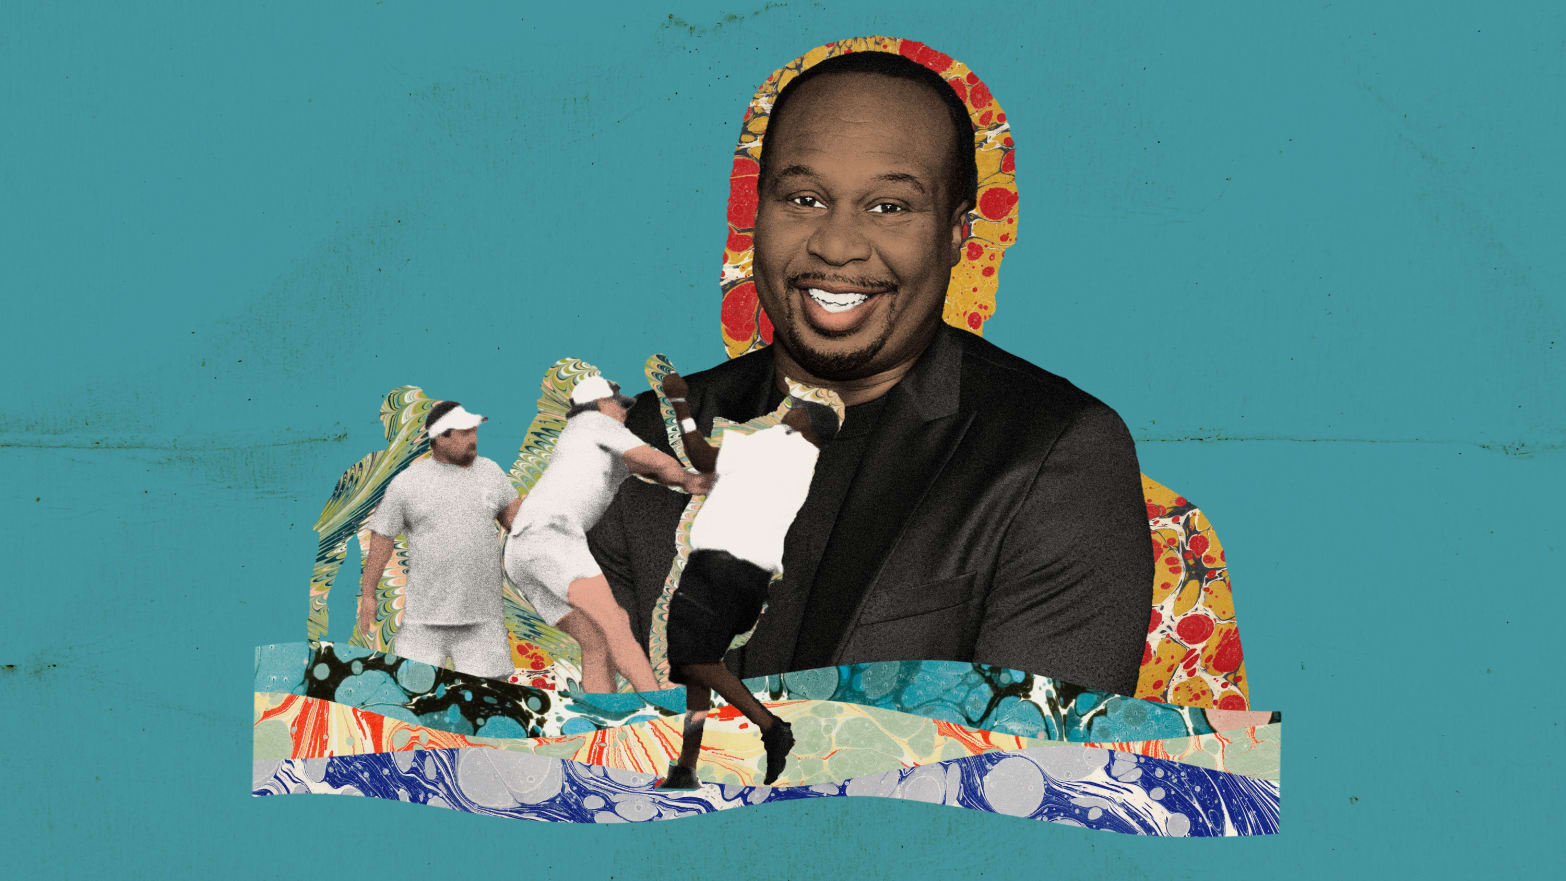 Photo illustration of Roy Wood Jr and a screenshot of a brawl on a Montgomery boat dock on a blue background